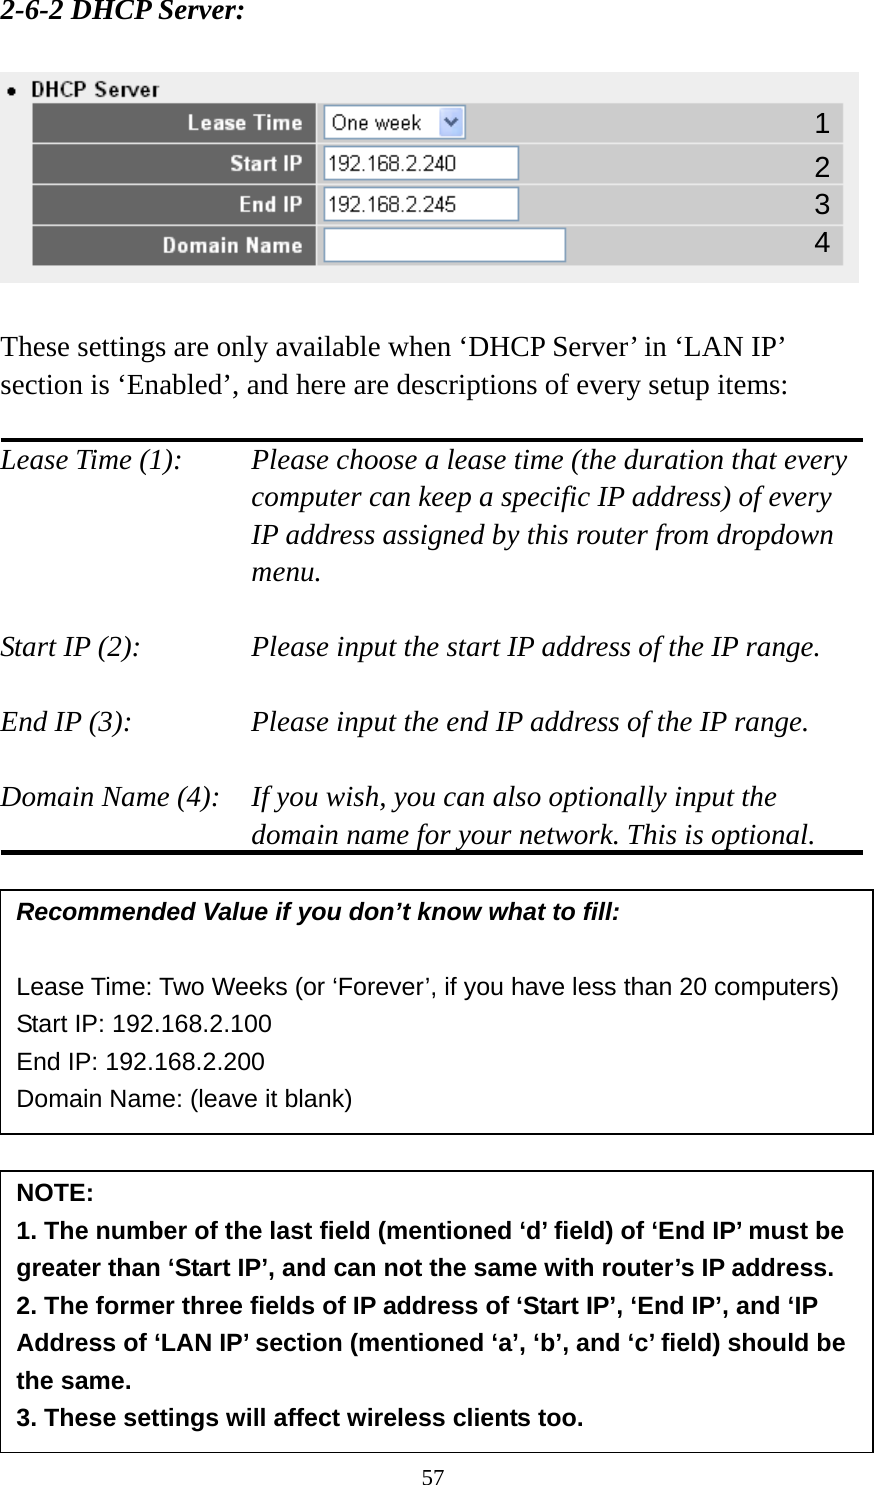 57 2-6-2 DHCP Server:    These settings are only available when ‘DHCP Server’ in ‘LAN IP’ section is ‘Enabled’, and here are descriptions of every setup items:  Lease Time (1):    Please choose a lease time (the duration that every computer can keep a specific IP address) of every IP address assigned by this router from dropdown menu.  Start IP (2):      Please input the start IP address of the IP range.  End IP (3):       Please input the end IP address of the IP range.  Domain Name (4):    If you wish, you can also optionally input the domain name for your network. This is optional.                Recommended Value if you don’t know what to fill:  Lease Time: Two Weeks (or ‘Forever’, if you have less than 20 computers) Start IP: 192.168.2.100 End IP: 192.168.2.200 Domain Name: (leave it blank) NOTE:  1. The number of the last field (mentioned ‘d’ field) of ‘End IP’ must be greater than ‘Start IP’, and can not the same with router’s IP address. 2. The former three fields of IP address of ‘Start IP’, ‘End IP’, and ‘IP Address of ‘LAN IP’ section (mentioned ‘a’, ‘b’, and ‘c’ field) should be the same. 3. These settings will affect wireless clients too. 1 3 4 2 